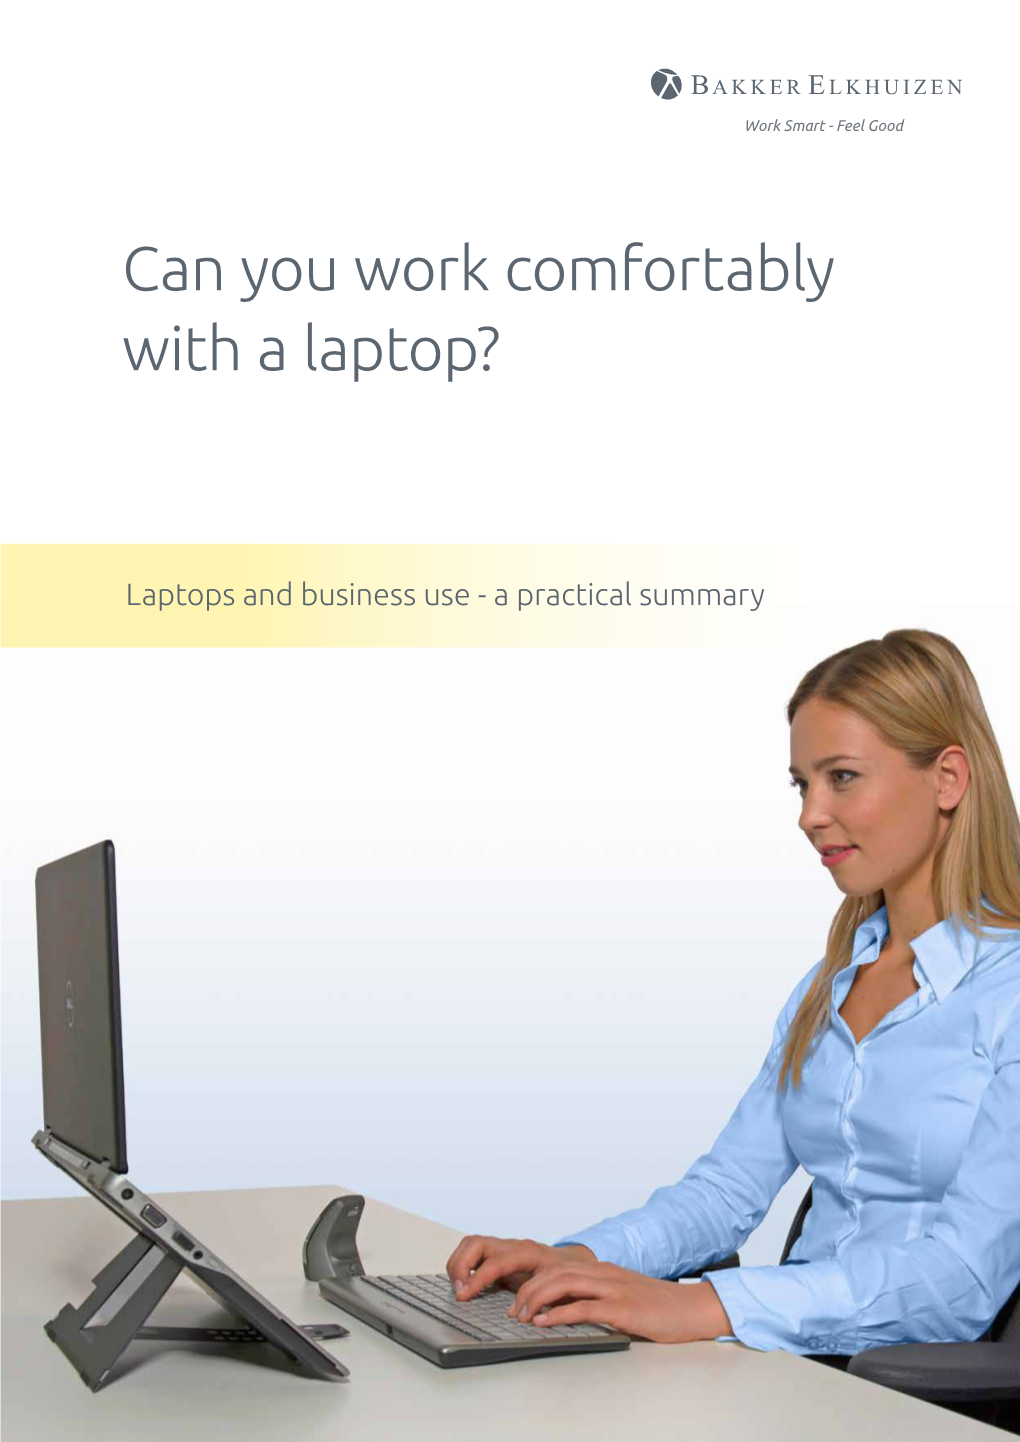 Can You Work Comfortably with a Laptop?